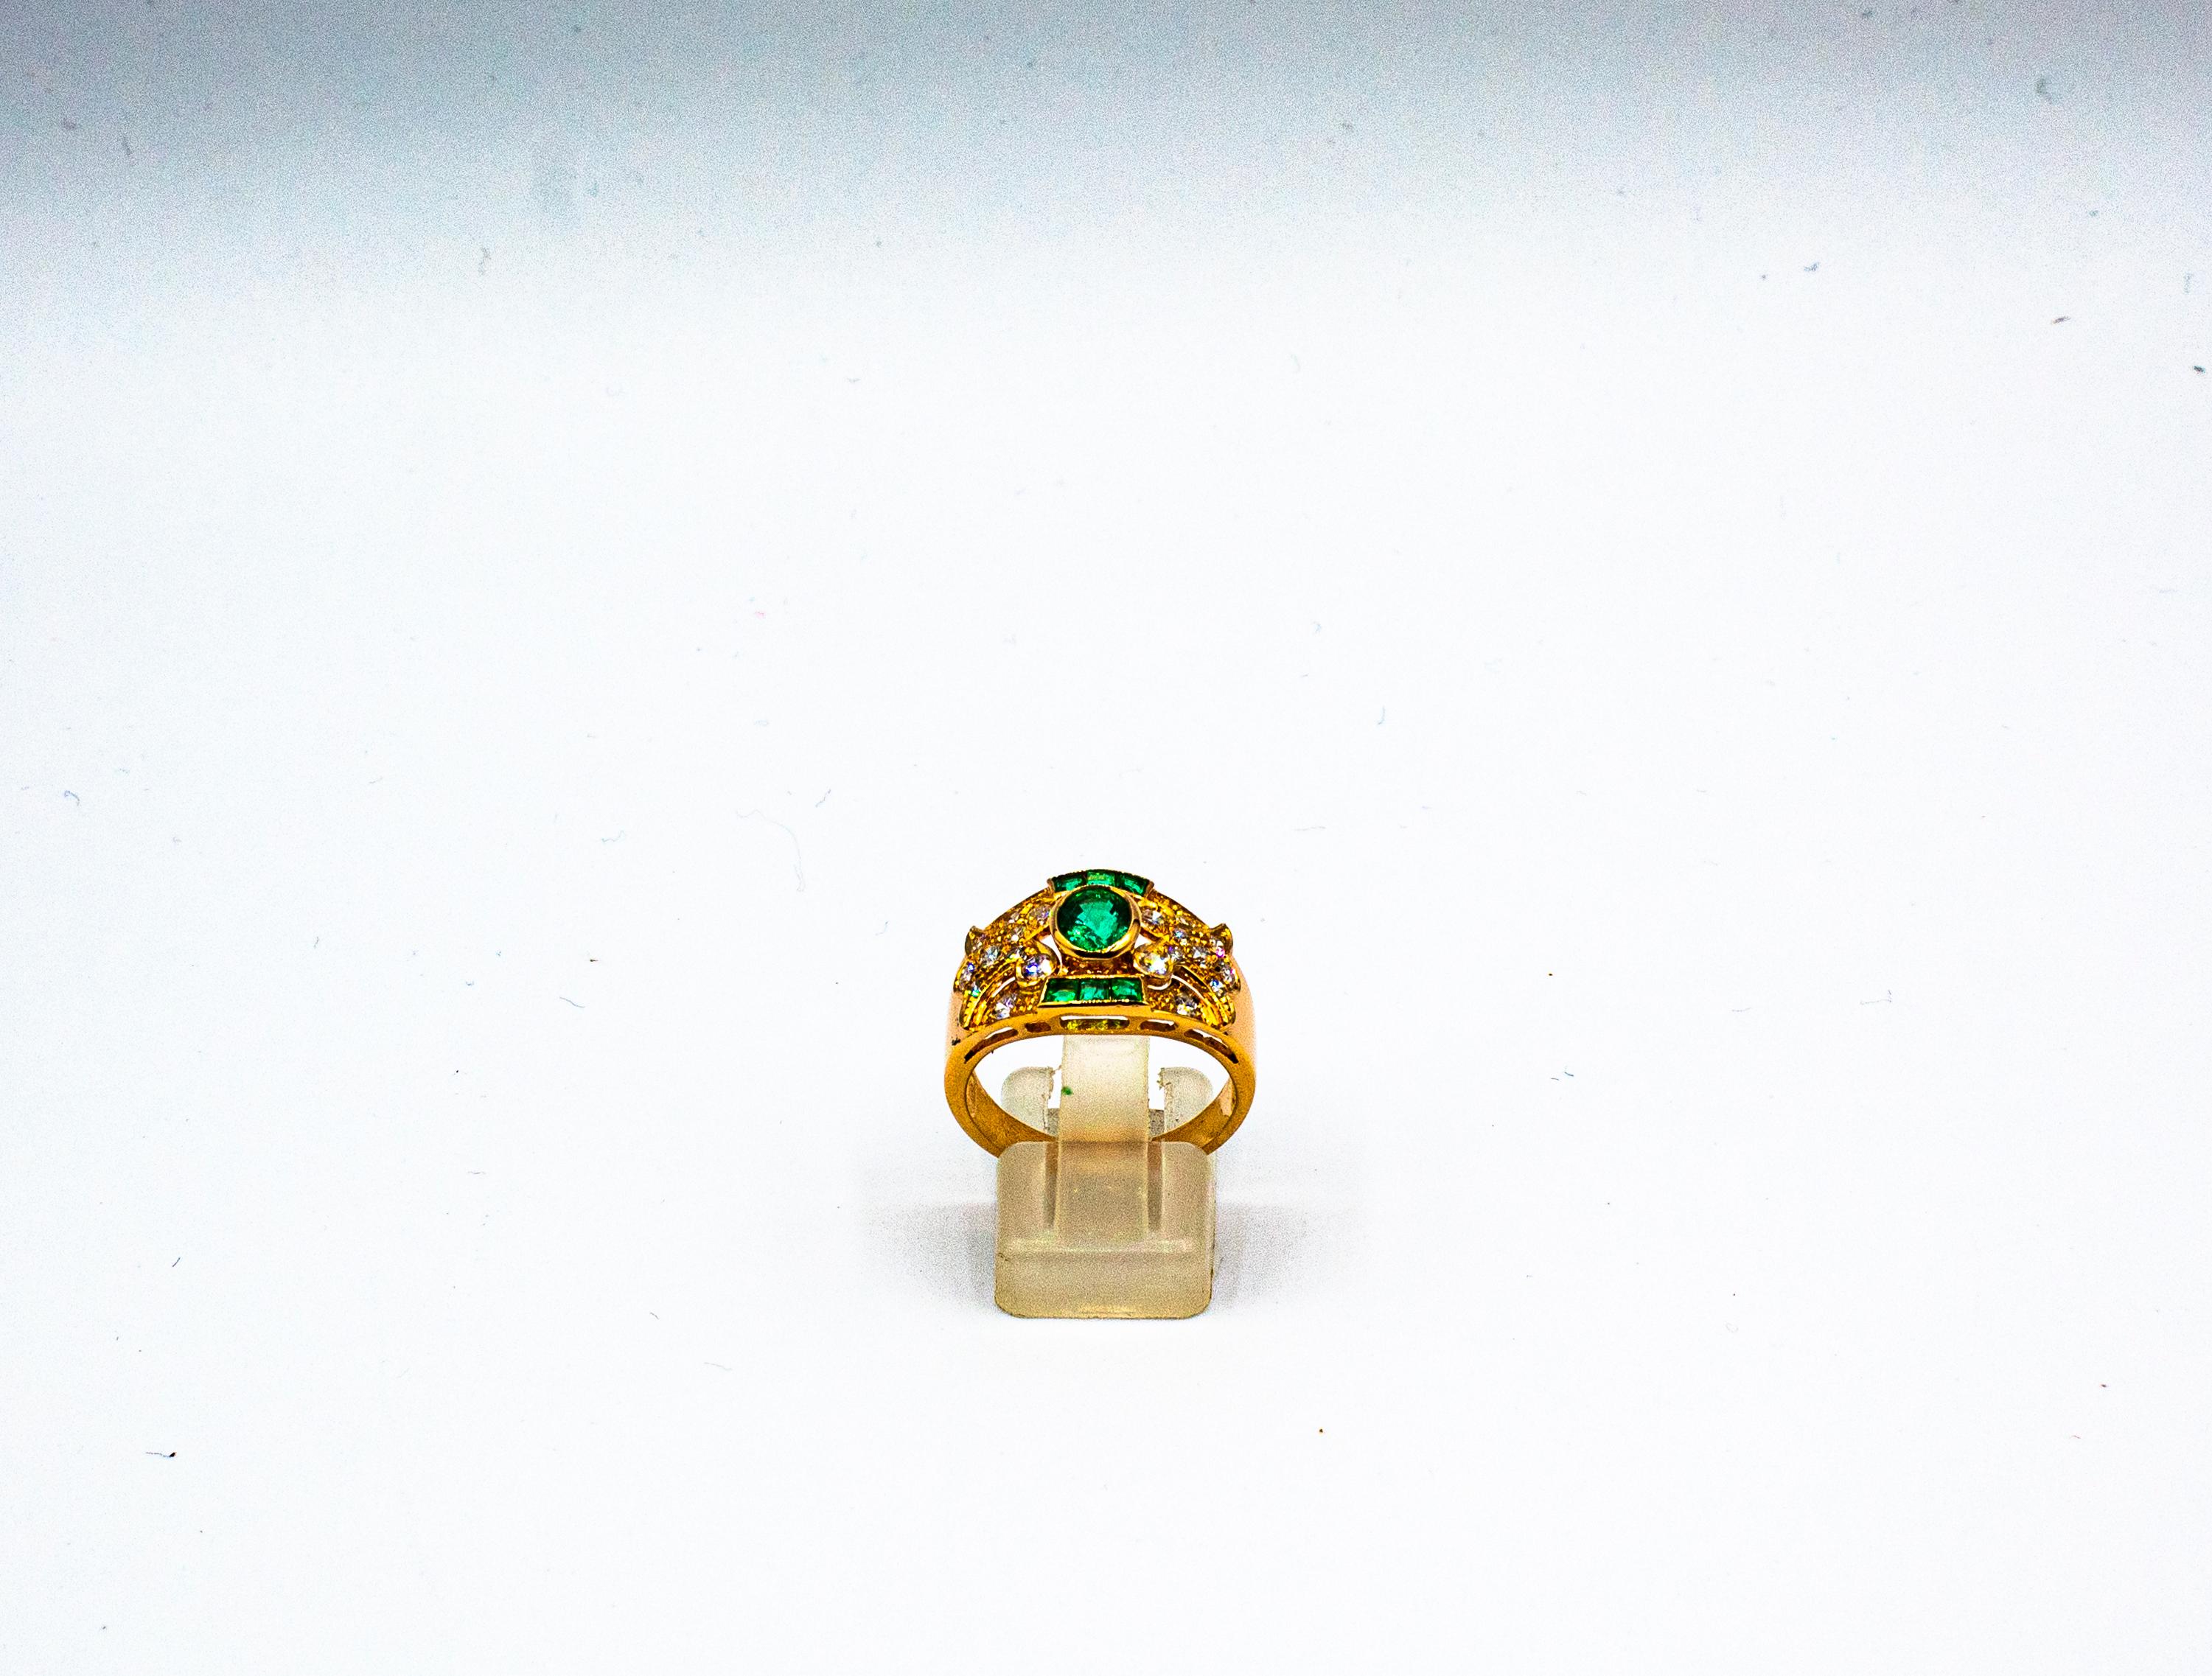 This Ring is made of 14K Yellow Gold.
This Ring has 0.56 Carats of White Brilliant Cut Diamonds. Color: H-G Clarity: VVS1
This Ring has a 0.70 Carats Natural Zambia Oval Cut Emerald.
This Ring has 0.30 Carats of Natural Carré Cut Emeralds.
This Ring